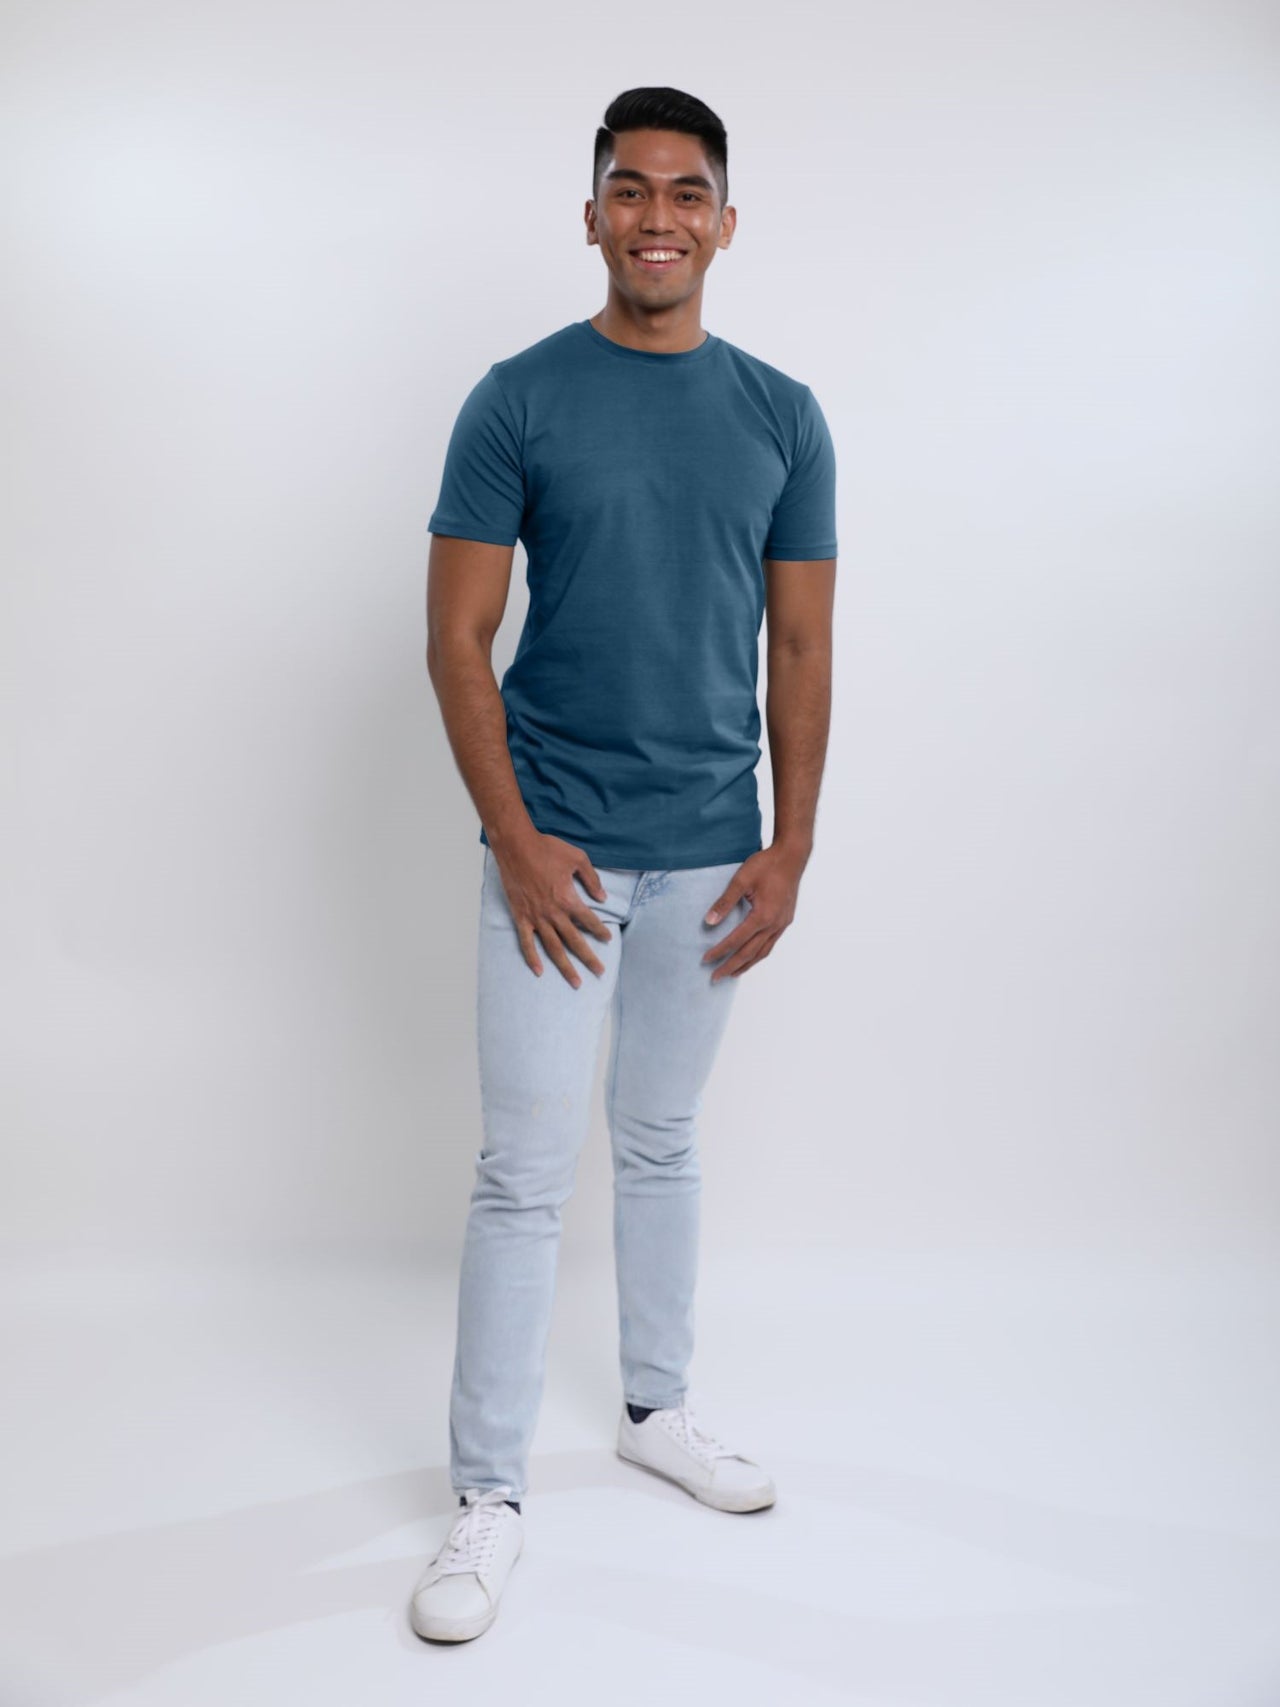 A head to toe shot of a tall skinny guy wearing a petrol medium tall t-shirt and smiling.